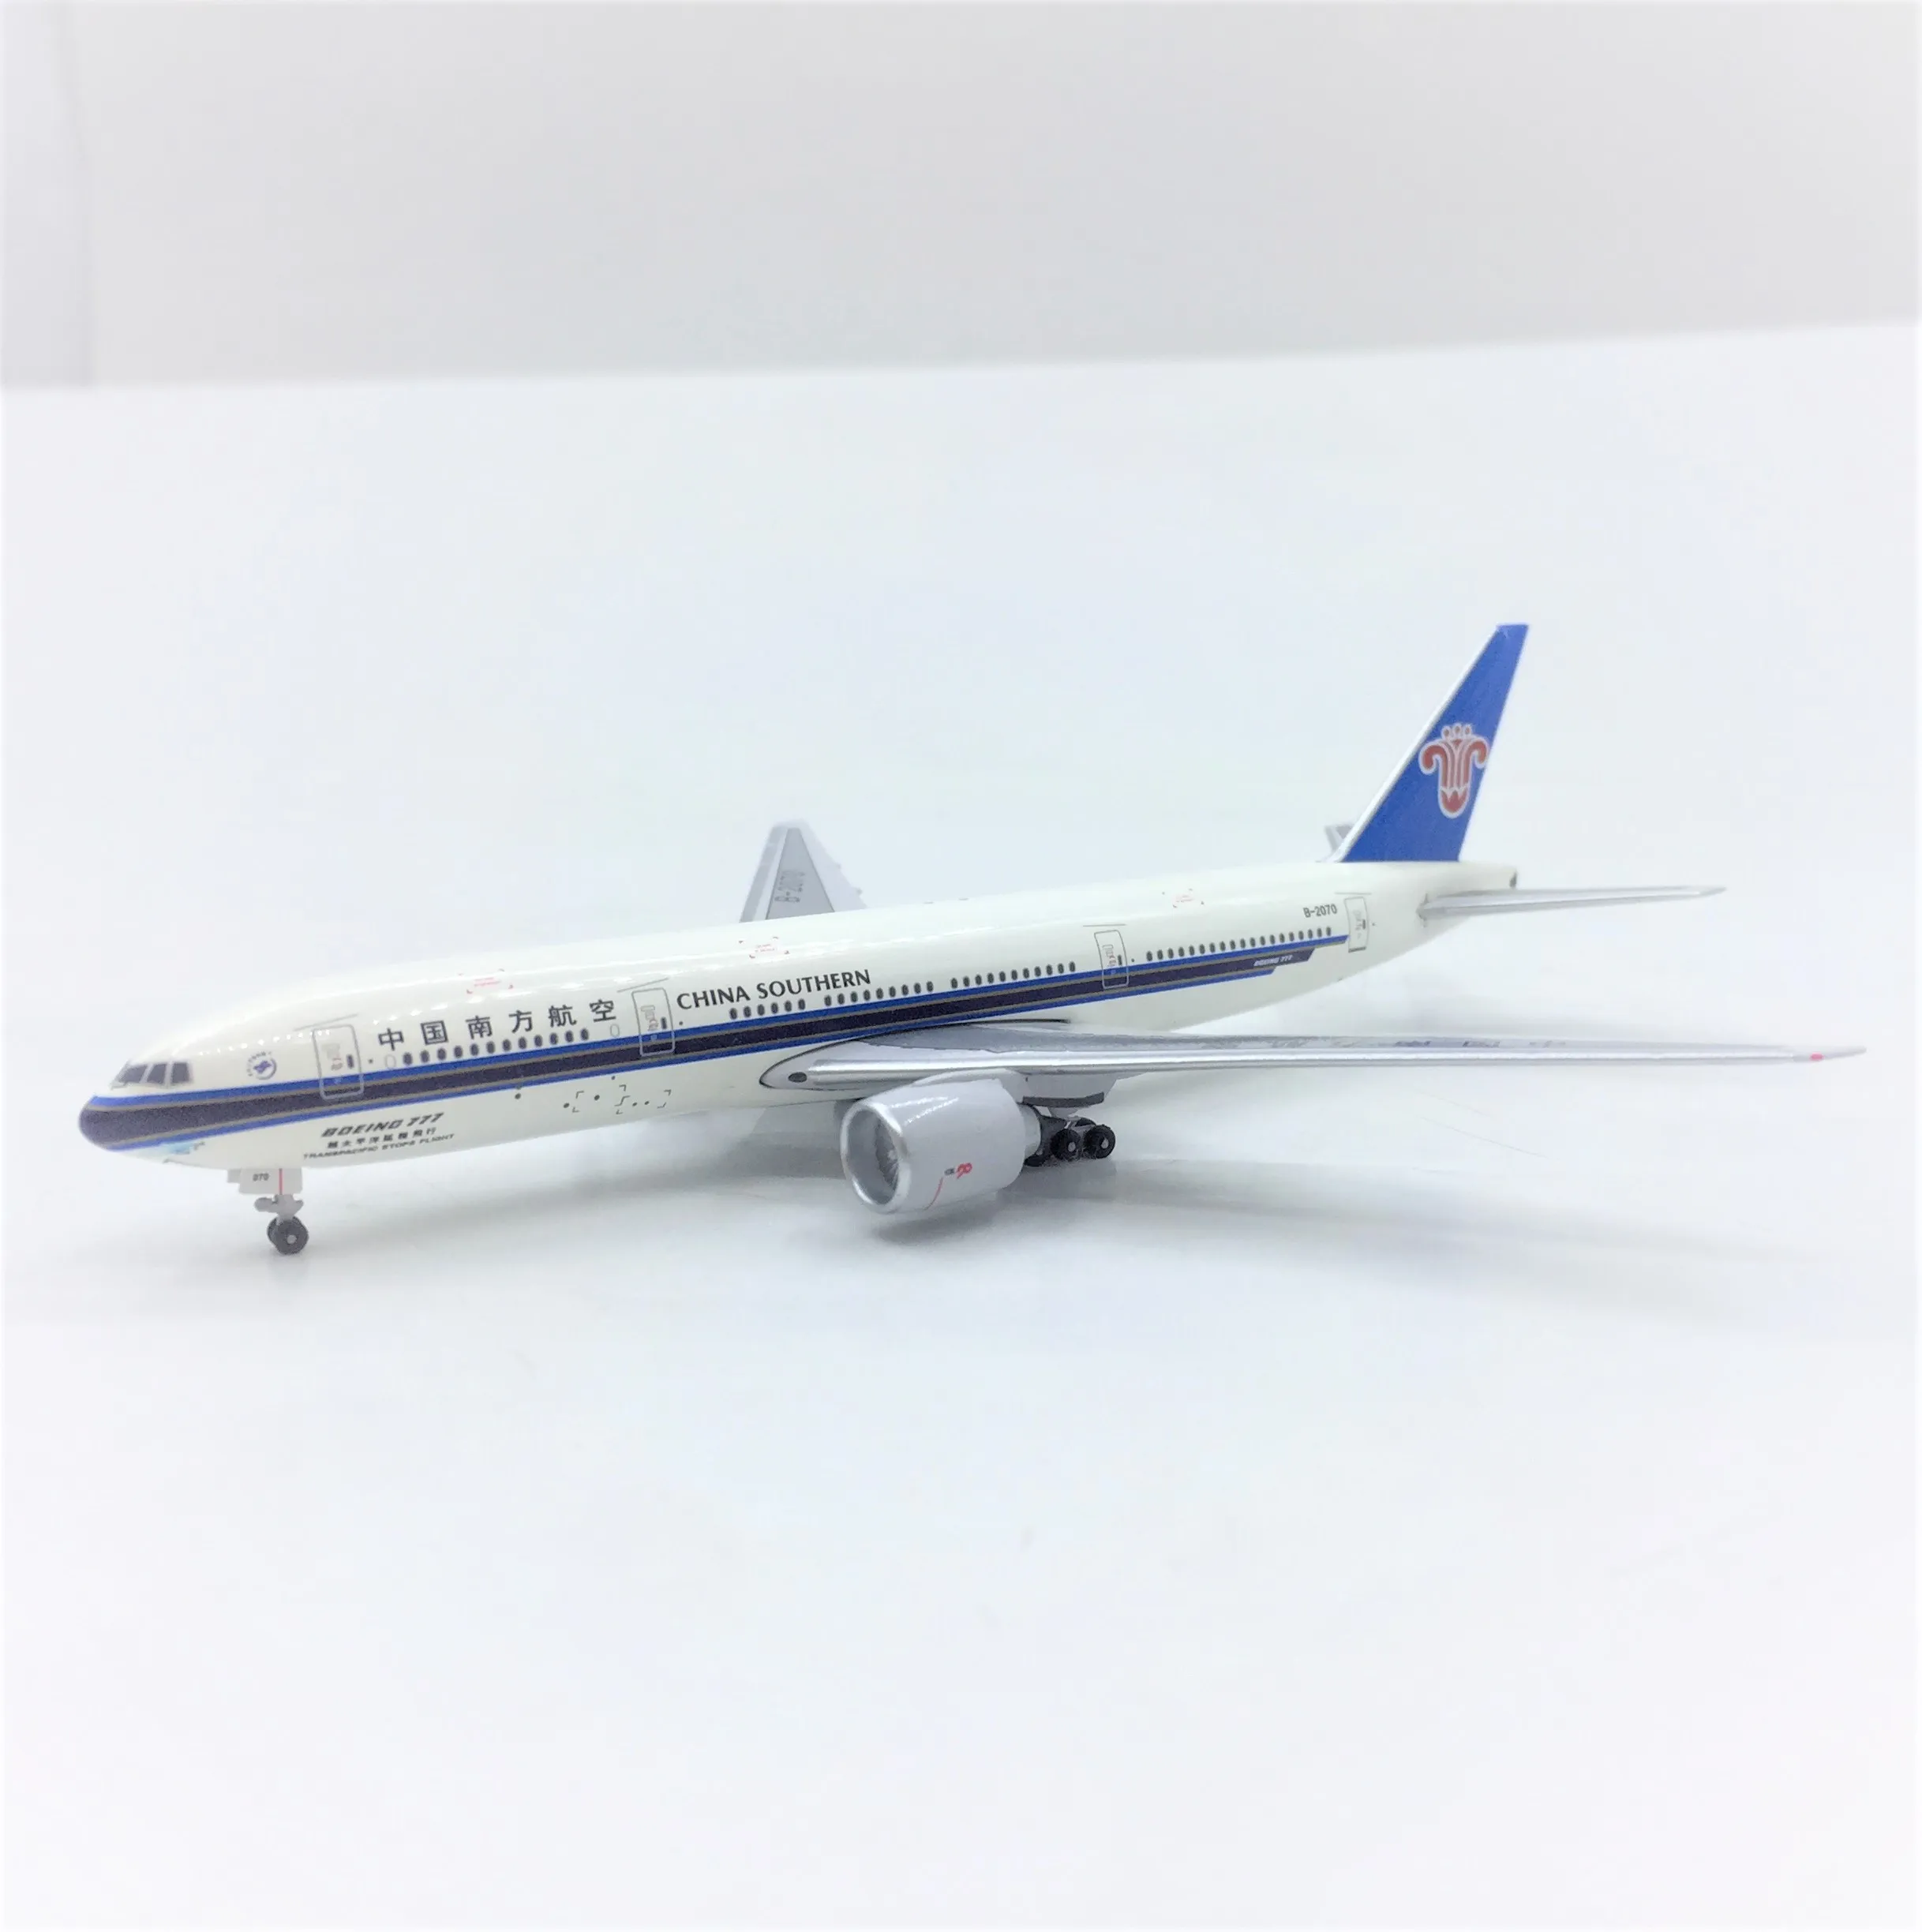 1 500 Scale Customized 777 High Detailed Die Cast Model Airplanes 777er For China Southern Buy 1 500 Airplane Model Collectible Die Cast Aircraft Model Model Airplanes For Sale Product On Alibaba Com